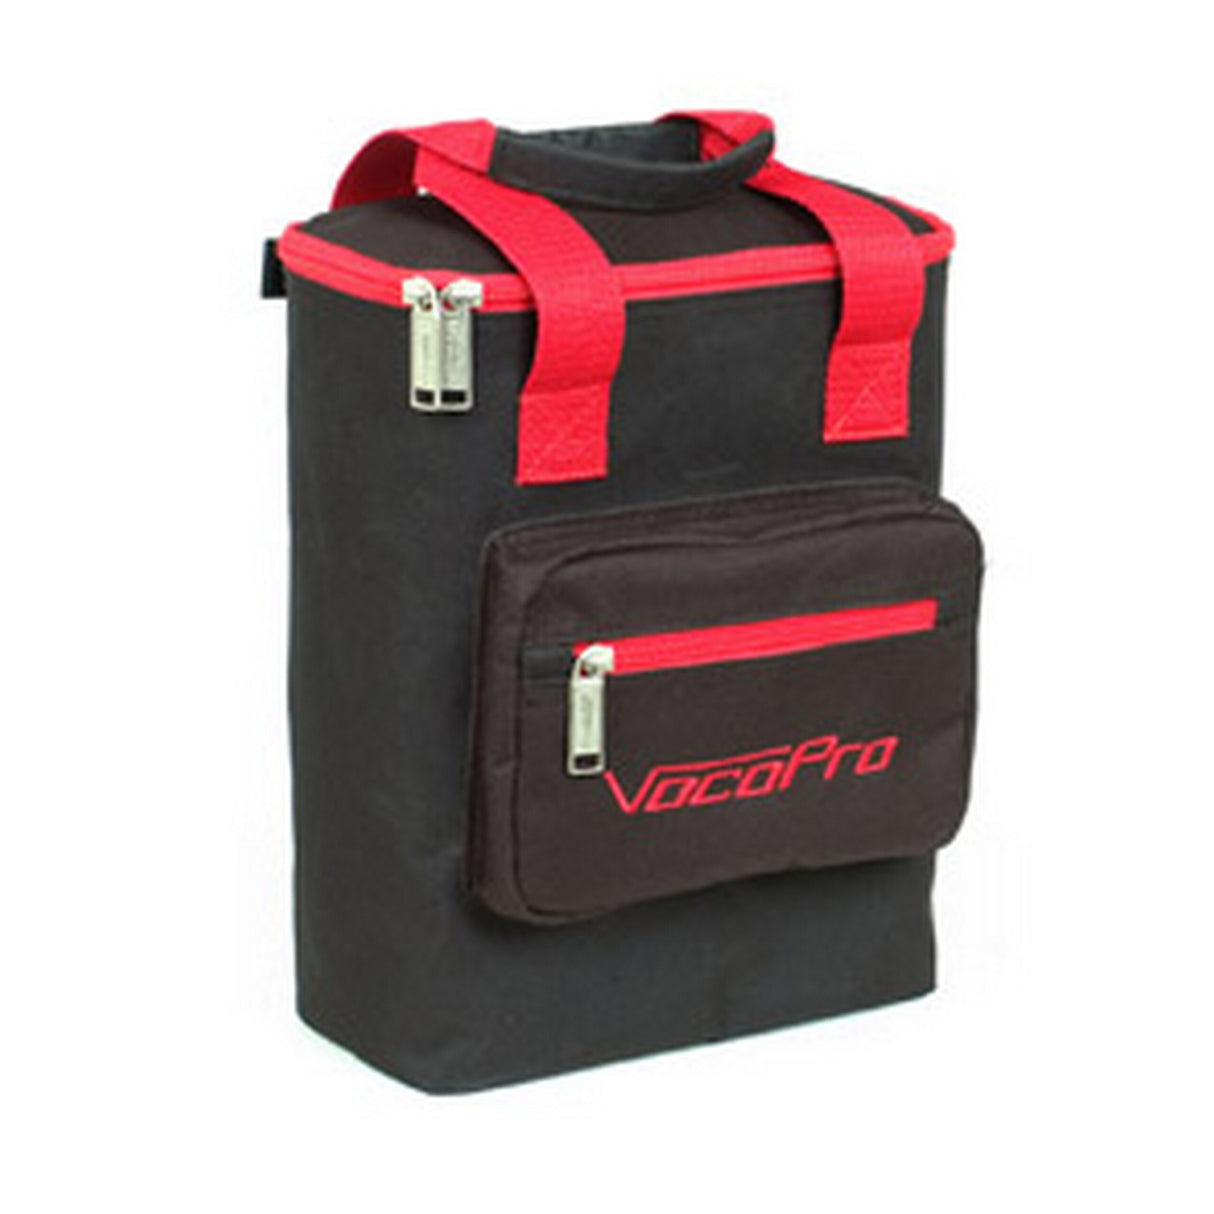 VocoPro BAG-4 Heavy Duty Carrying Bag for 4 Microphones